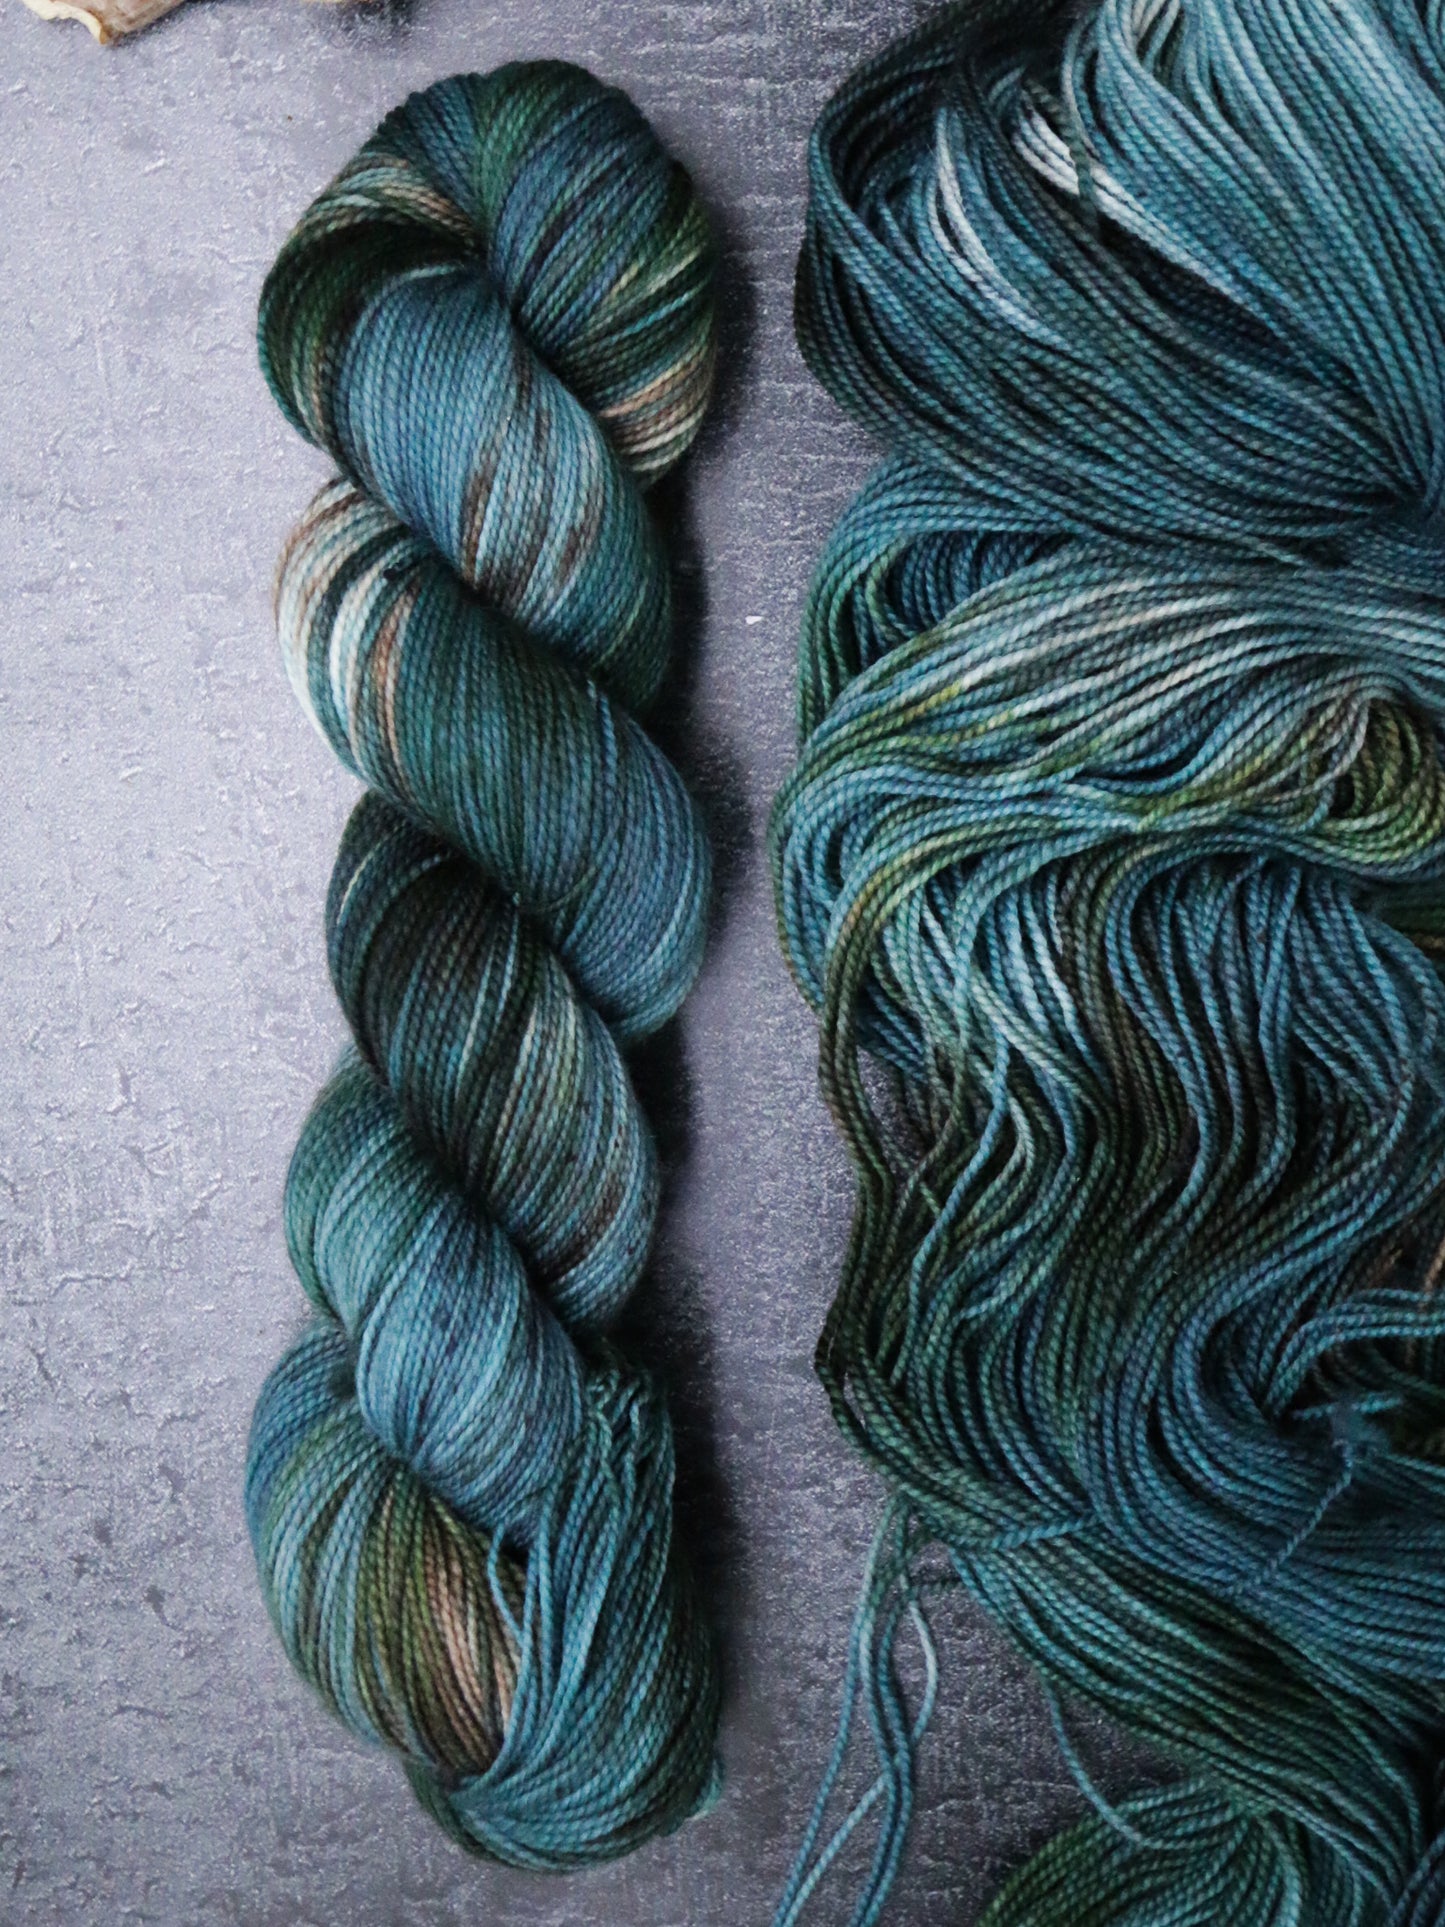 Restless Seas - Sweater Quantity and Dyed to Order